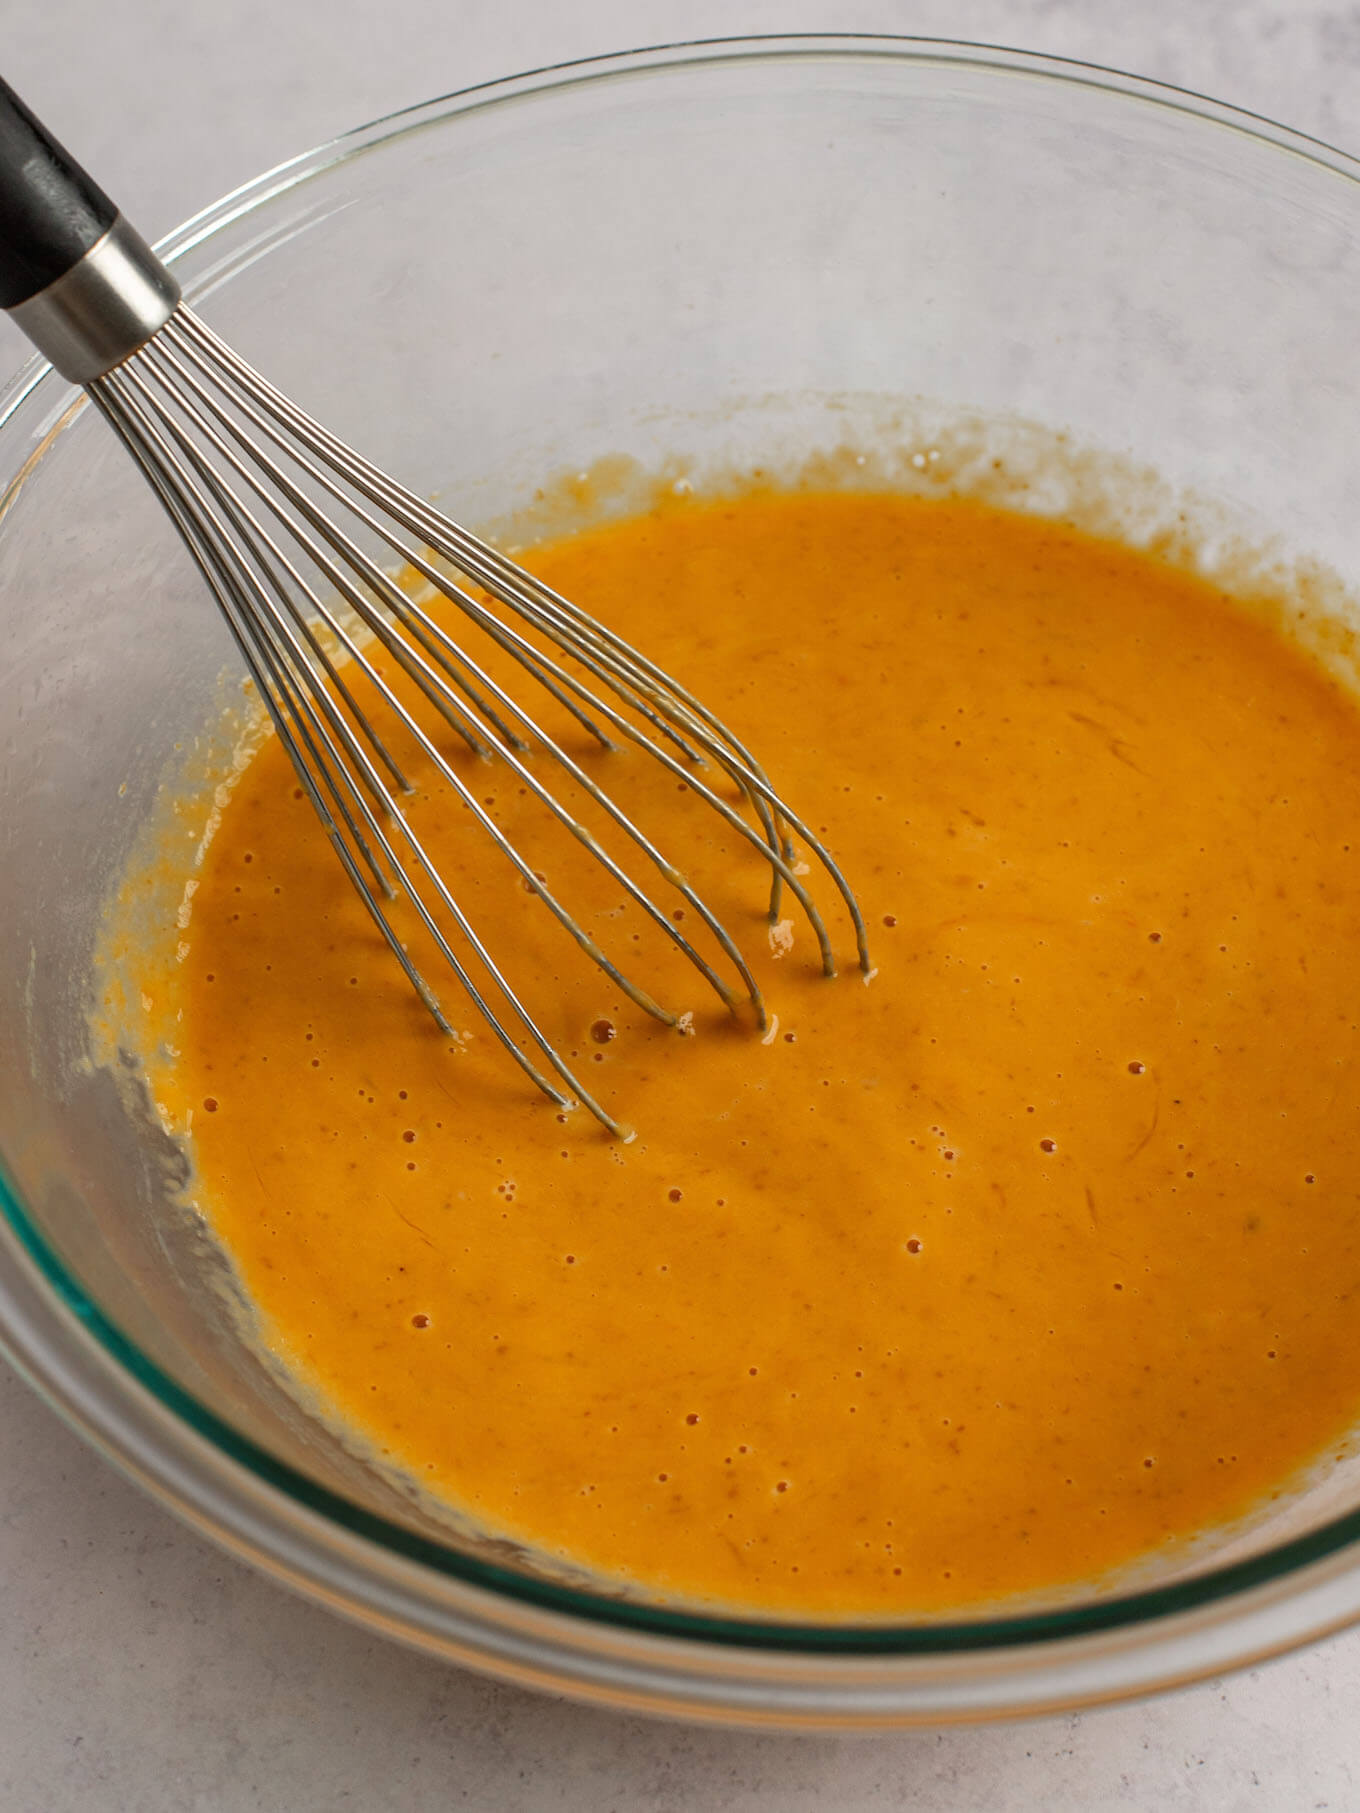 The wet ingredients for pumpkin pie whisked together in a glass mixing bowl.